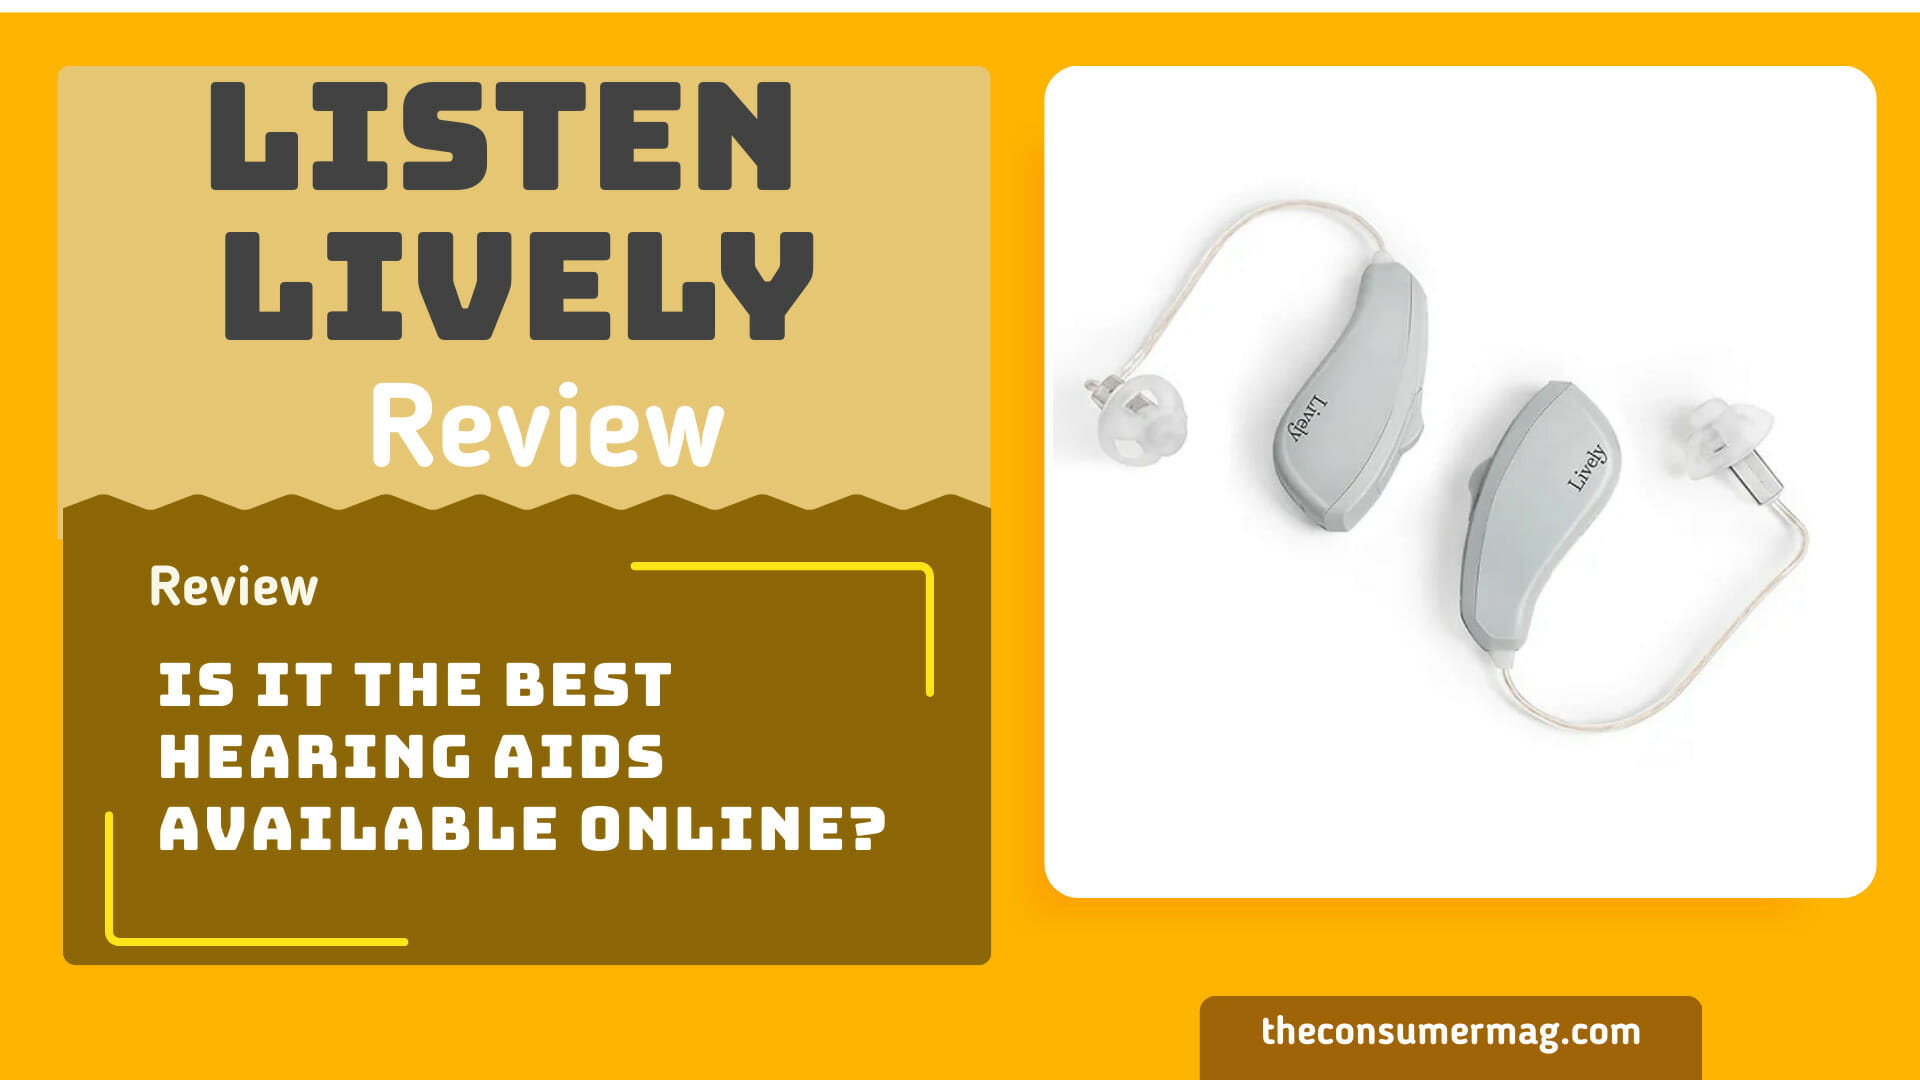 listen lively hearing aids review